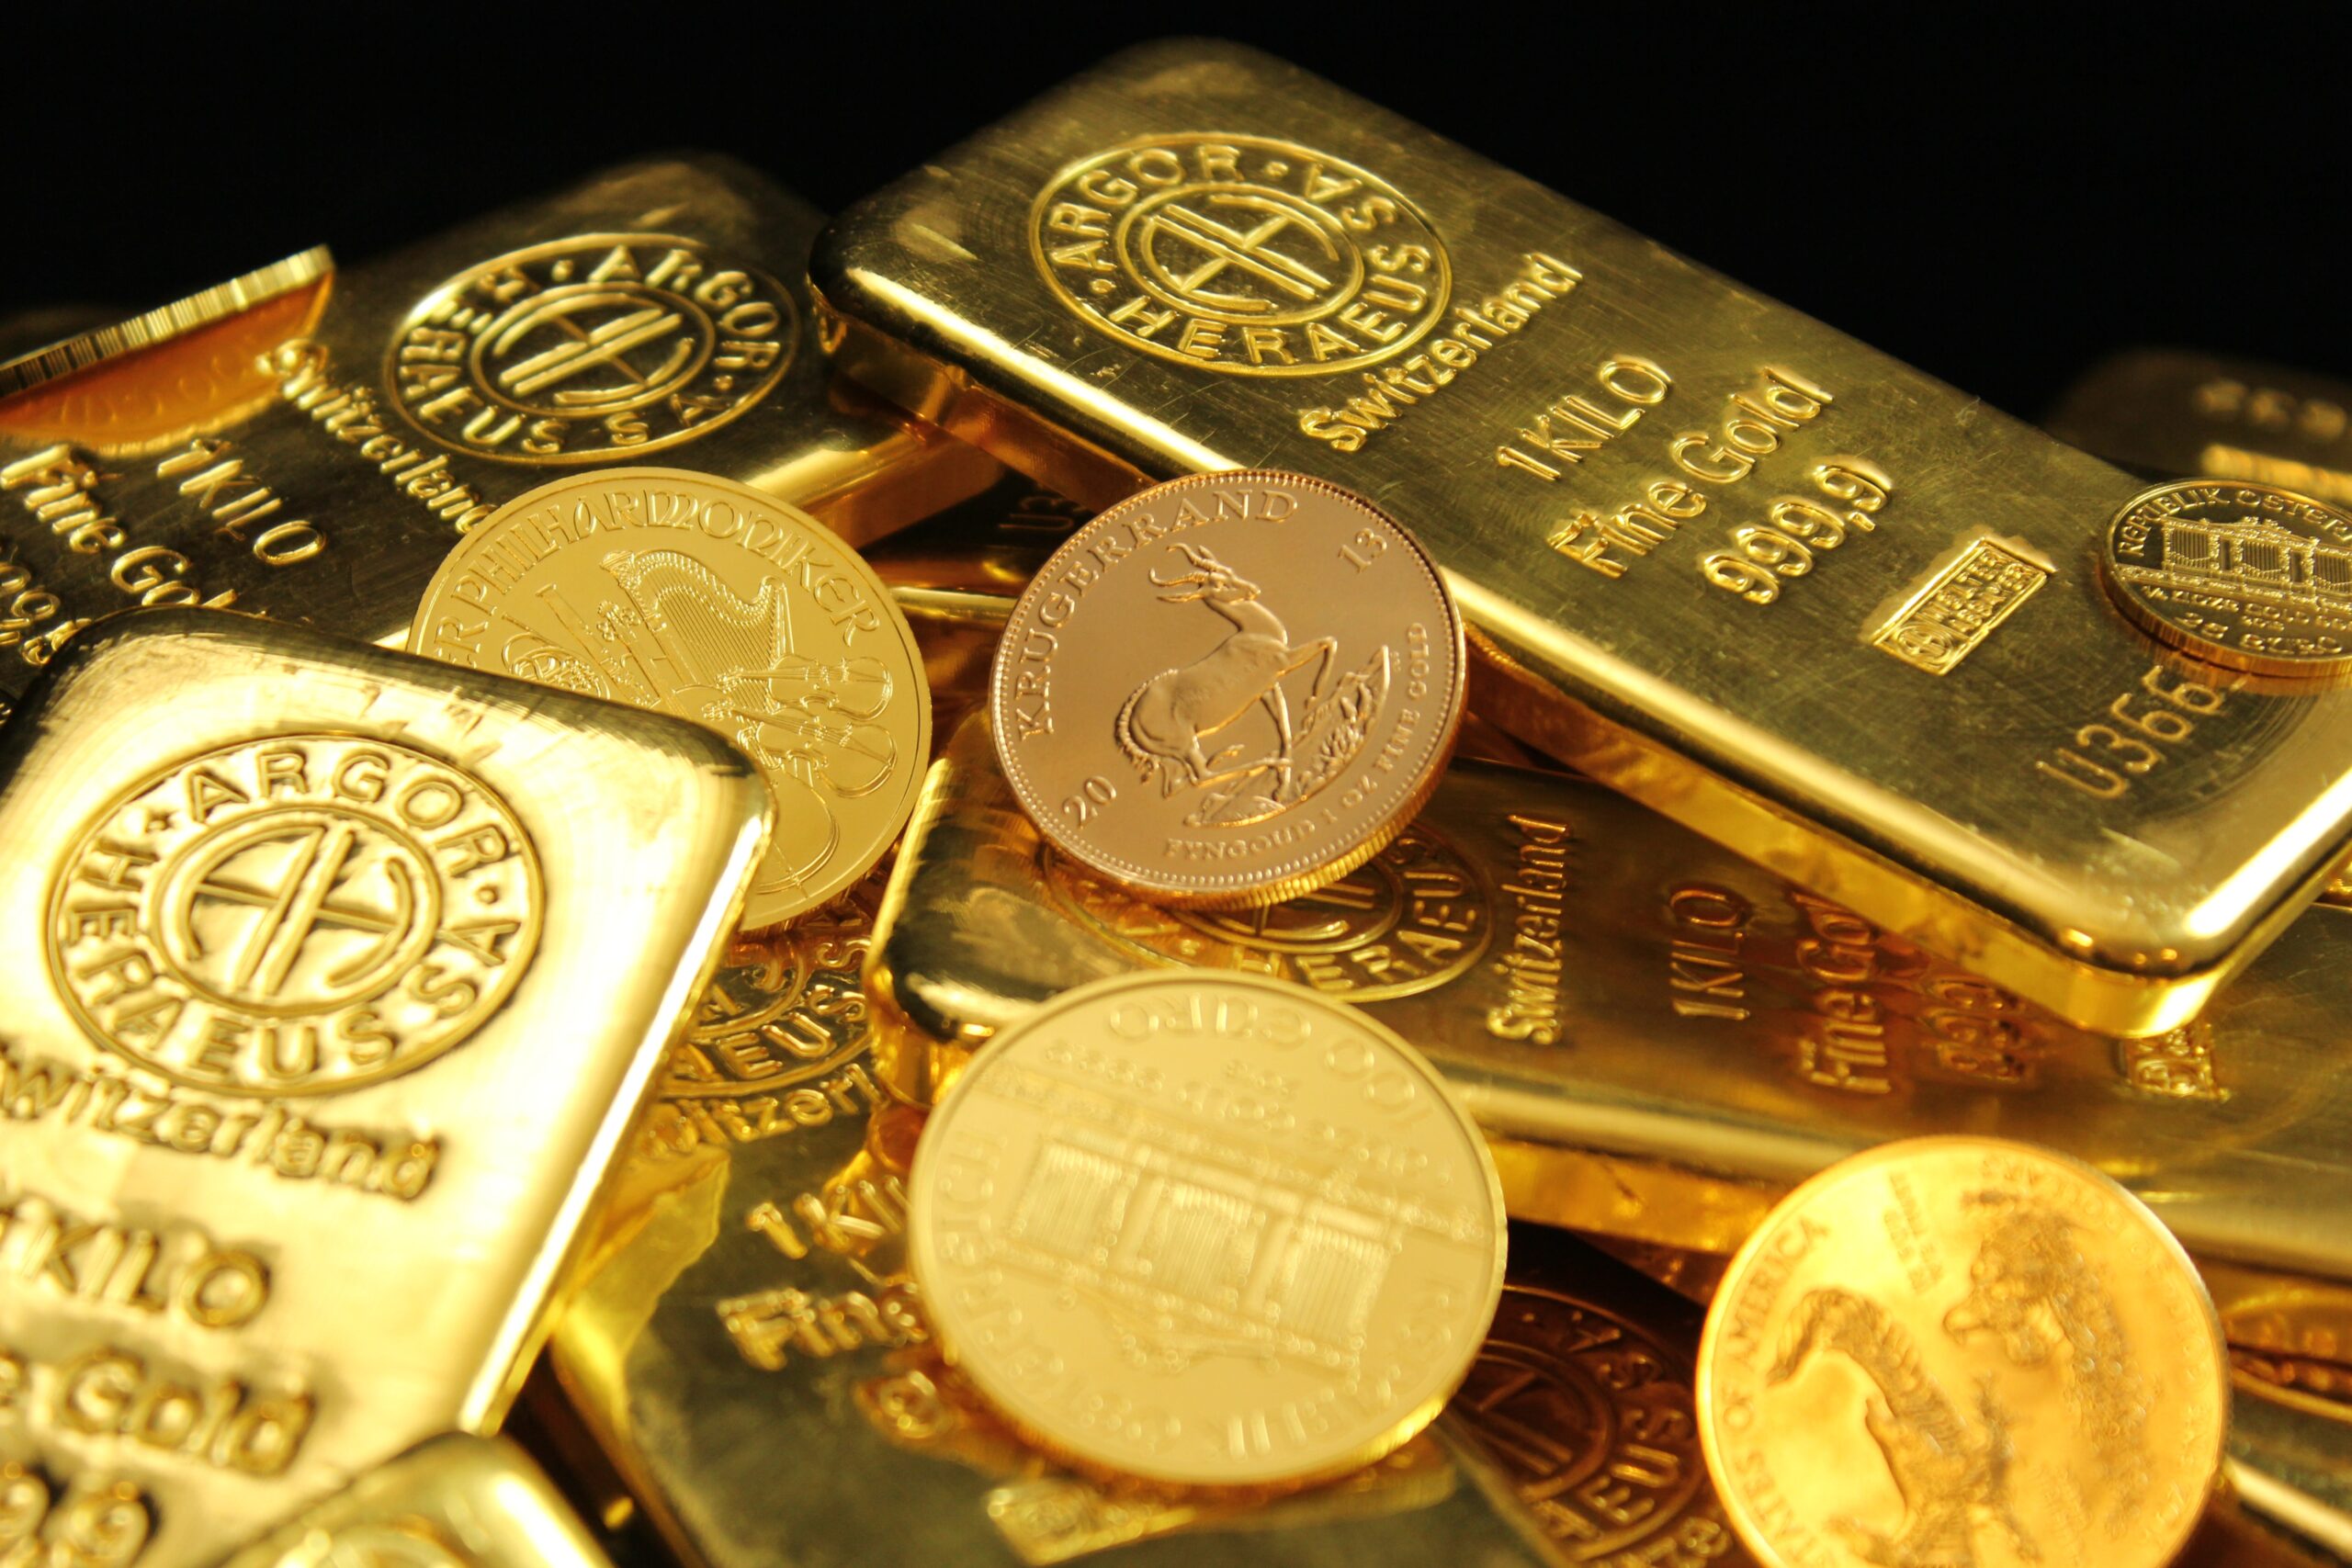 best gold ira companies of 2022 planning your retirement